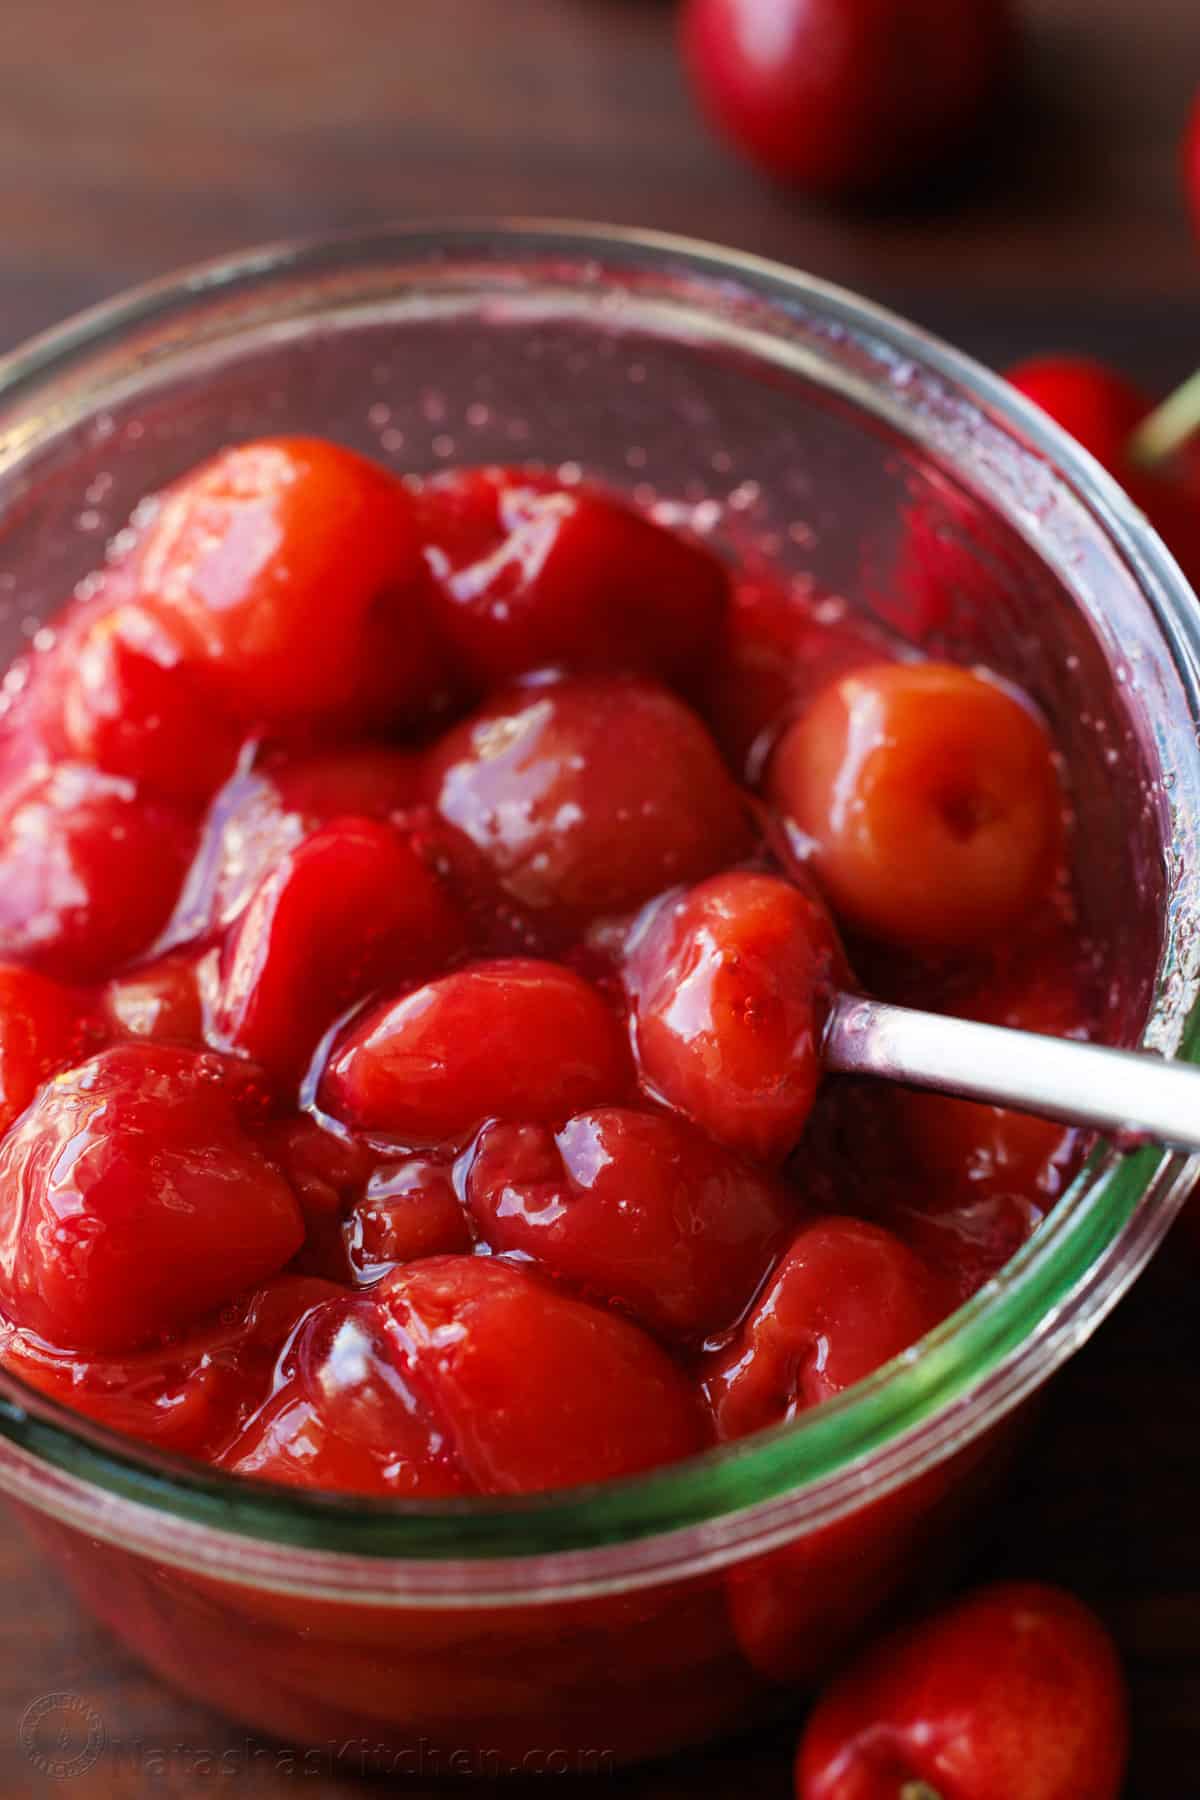 Homemade cherry topping in a glass bowl